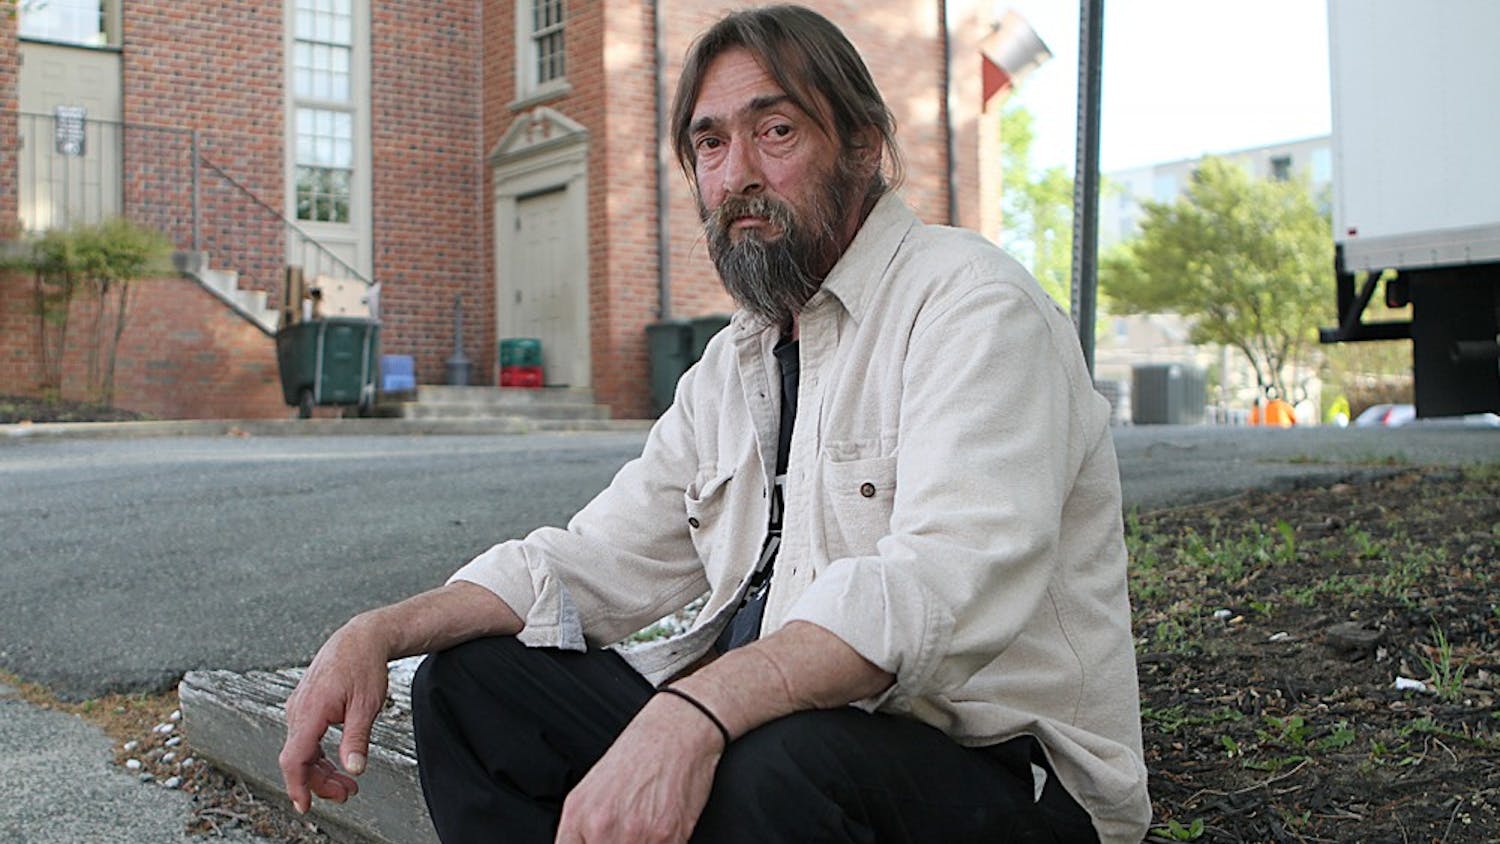 Tommy Keeter sits outside the IFC, a local homeless shelter located on Rosemary Street. Keeter says the IFC has several services available for the homeless, including medical and psychiatric care.